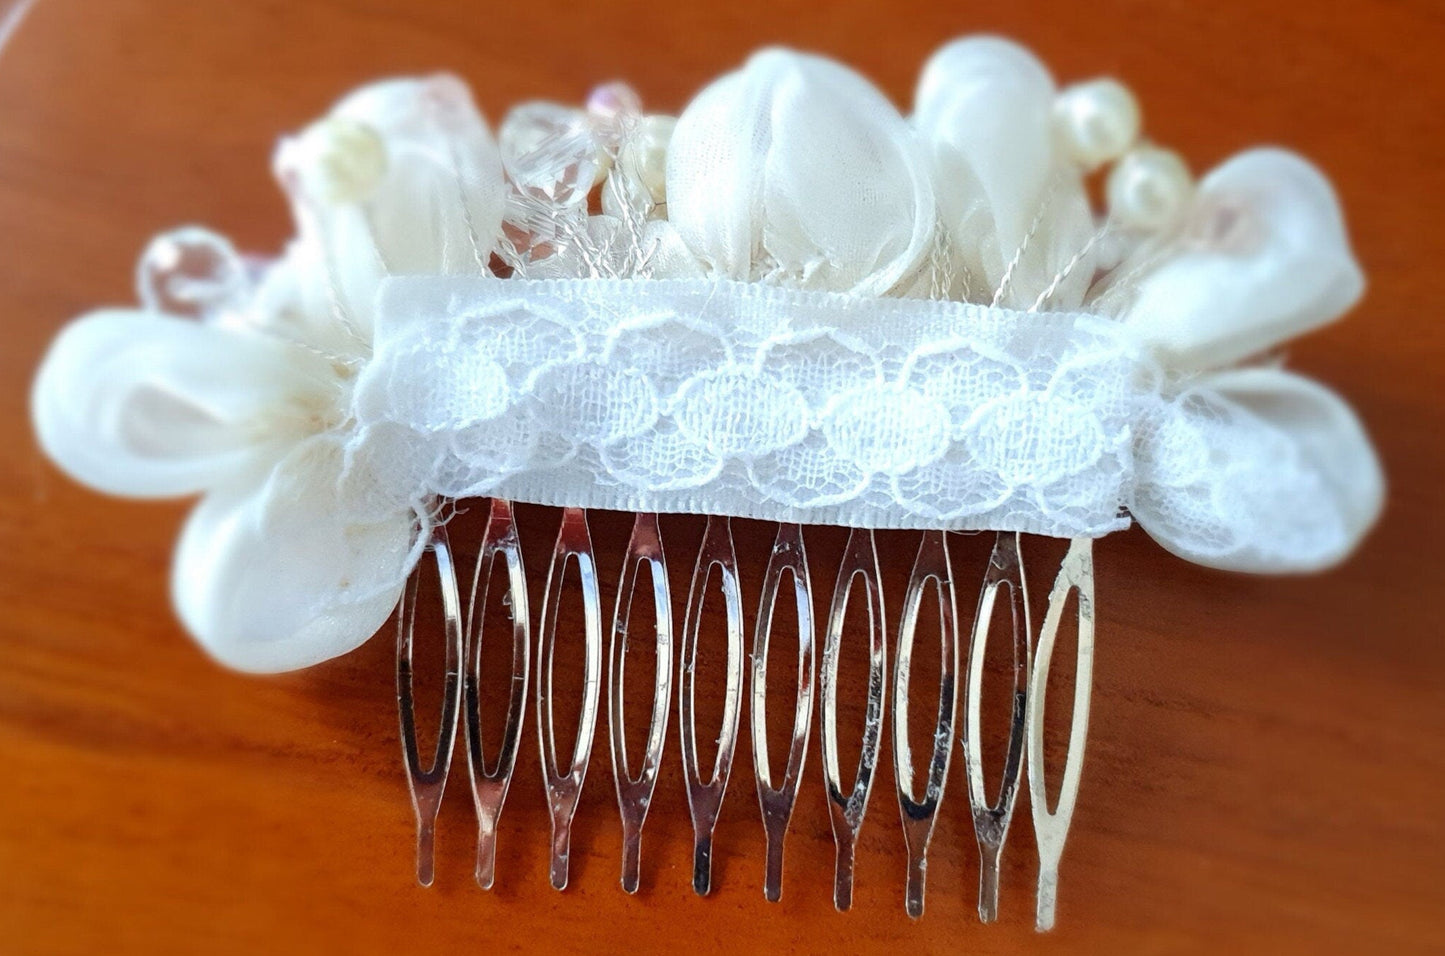 Handmade bridal comb with pearls and crystal beads - from organza fabric, hair accessory for weddings, silver-colored metal comb